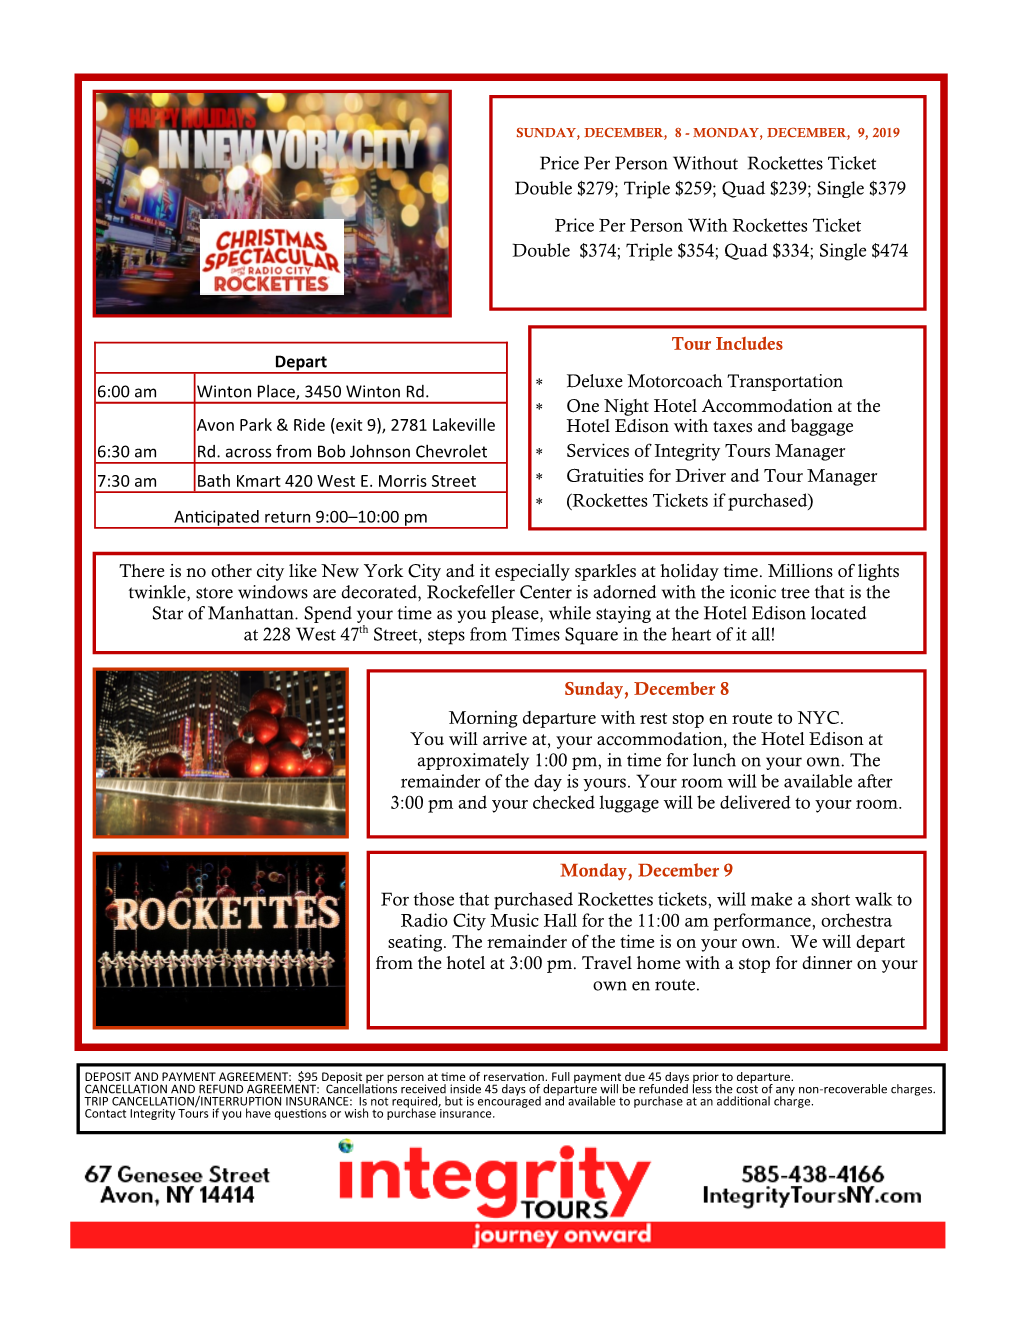 Price Per Person Without Rockettes Ticket Double $279; Triple $259; Quad $239; Single $379